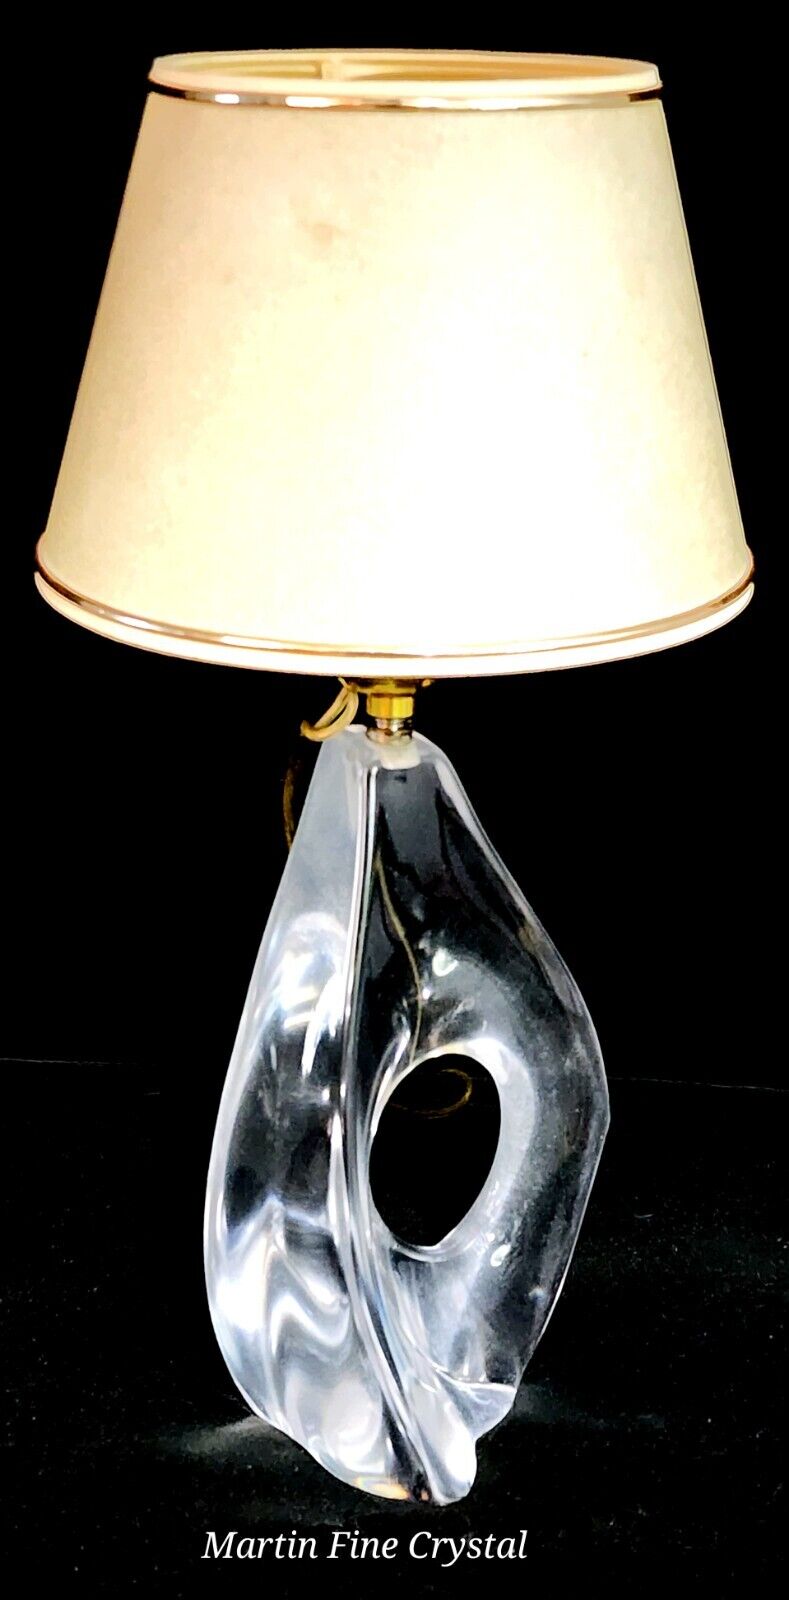 Daum French Crystal Lamp - 1950\'s Genuine Model 1 - Absolutely Mint Condition